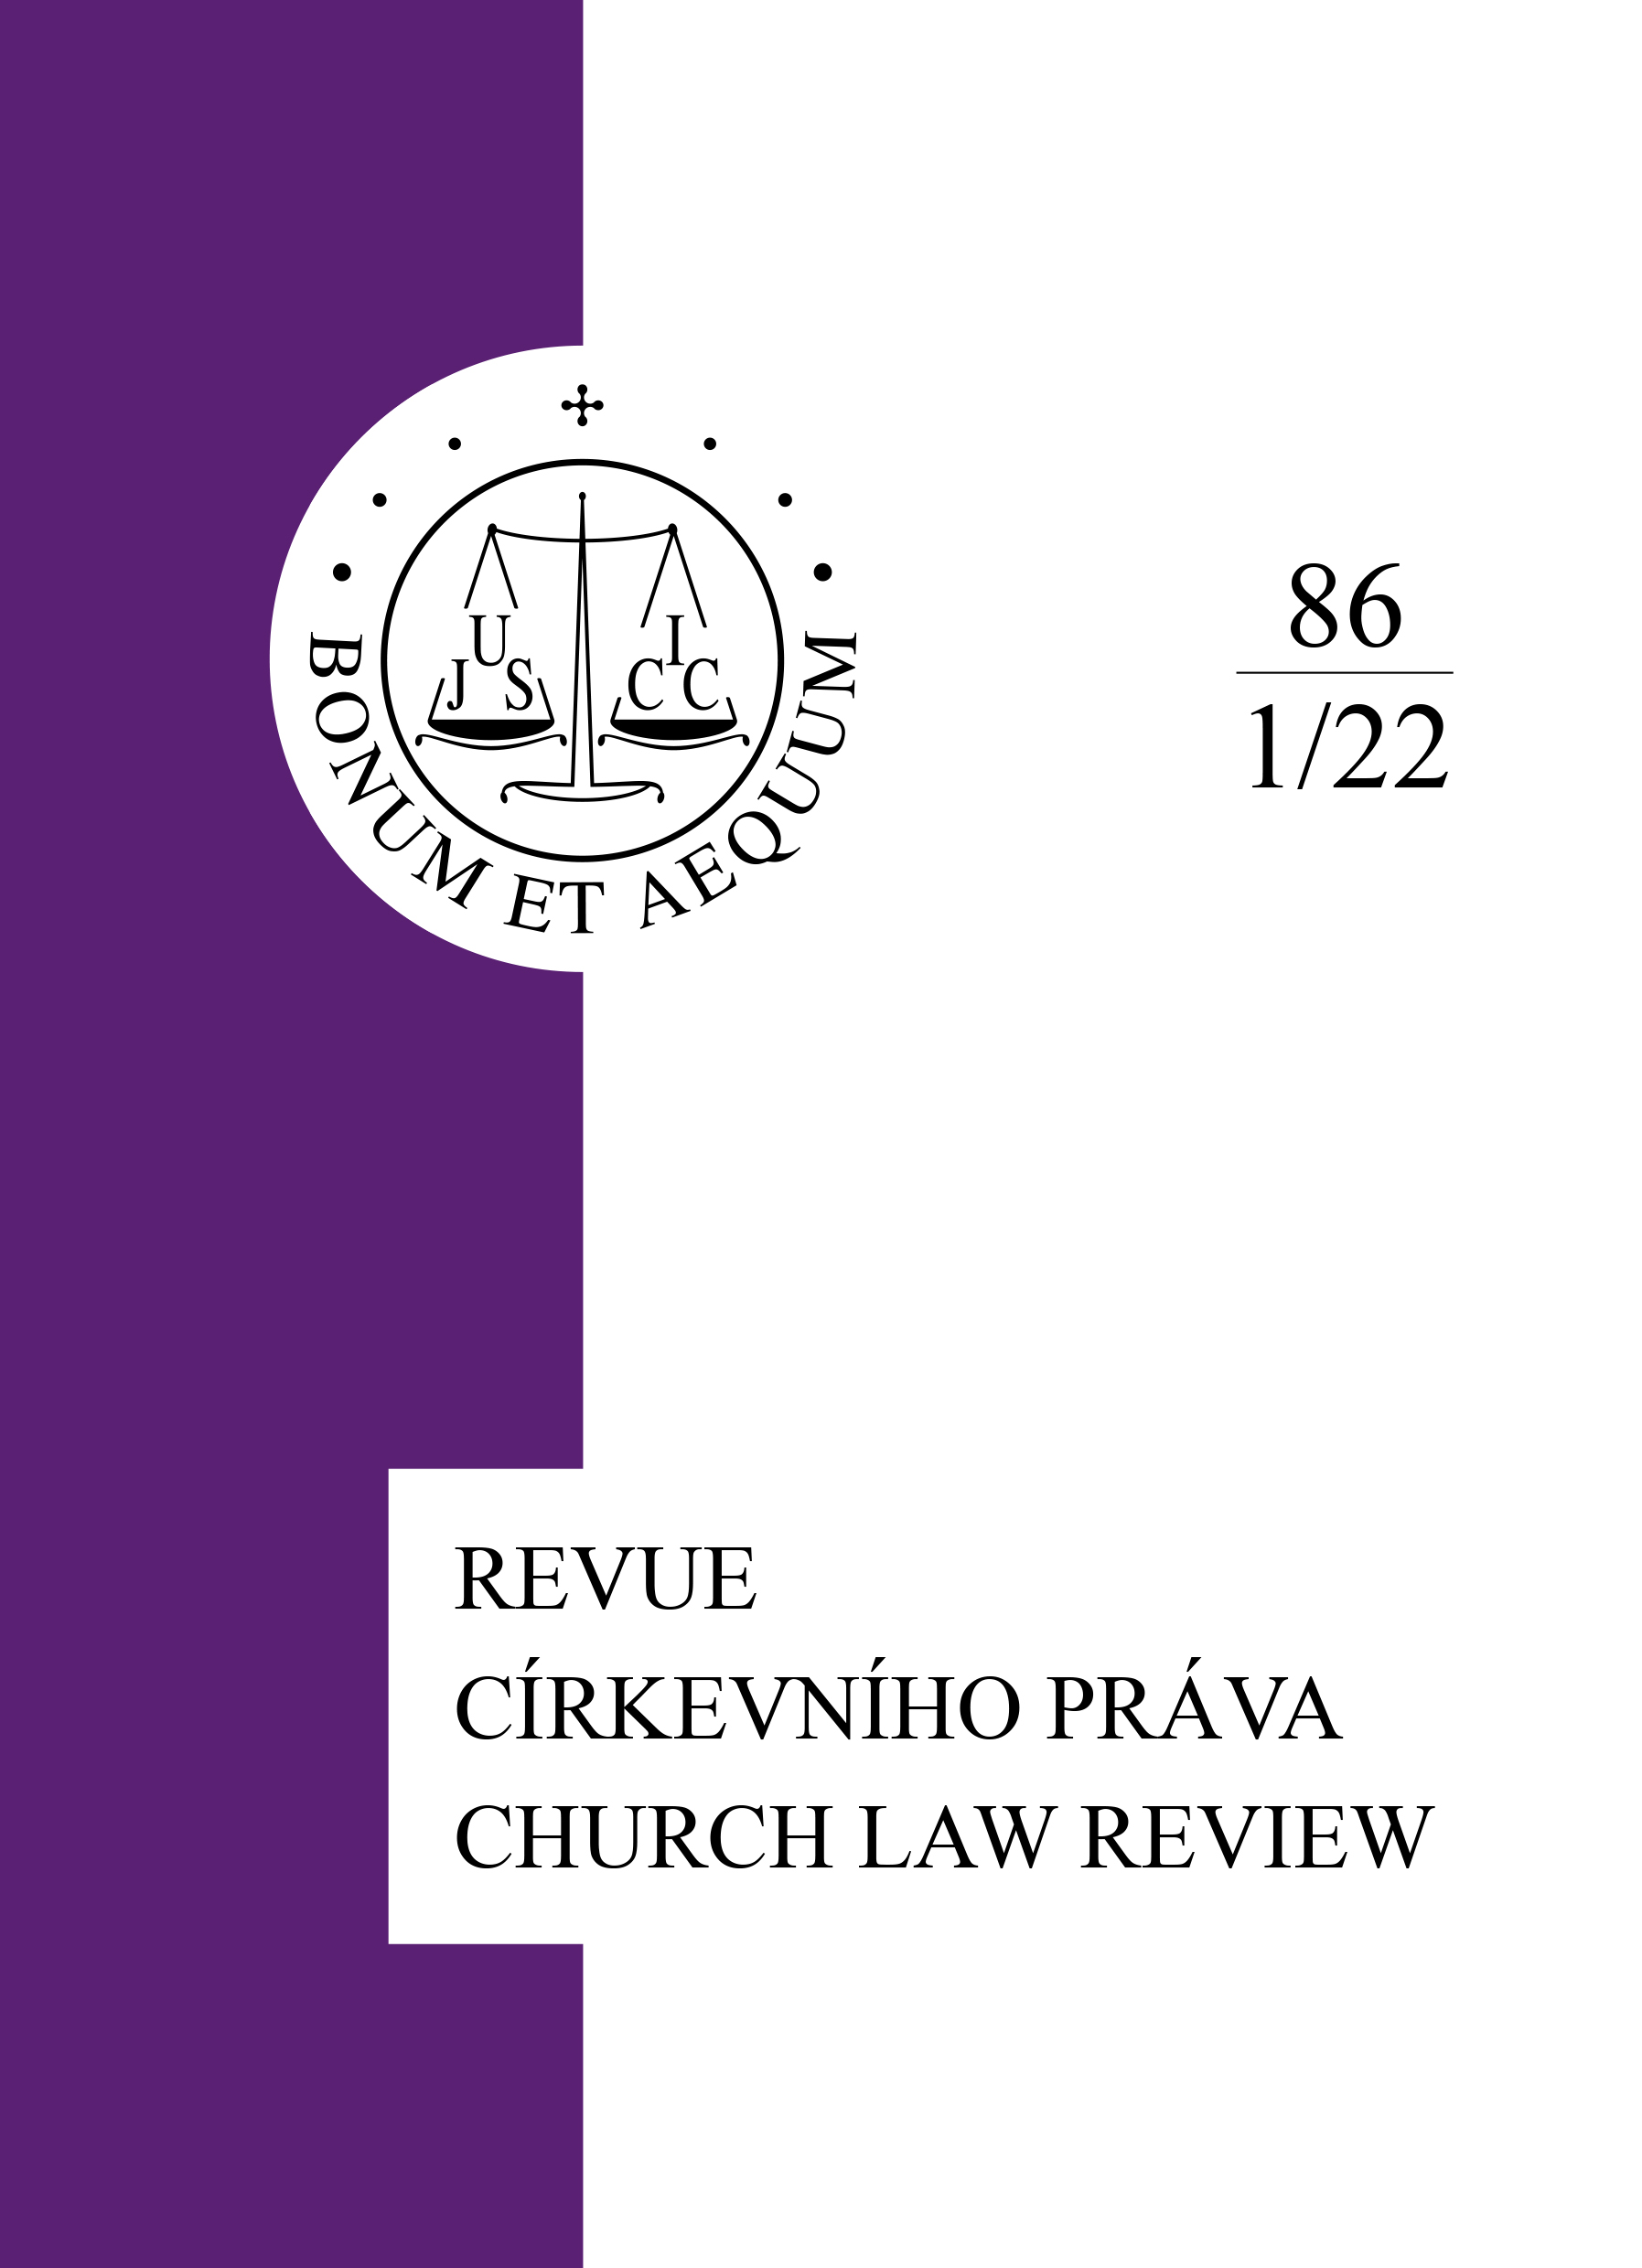 Appointment of Parish Priest According to CCEO Cover Image